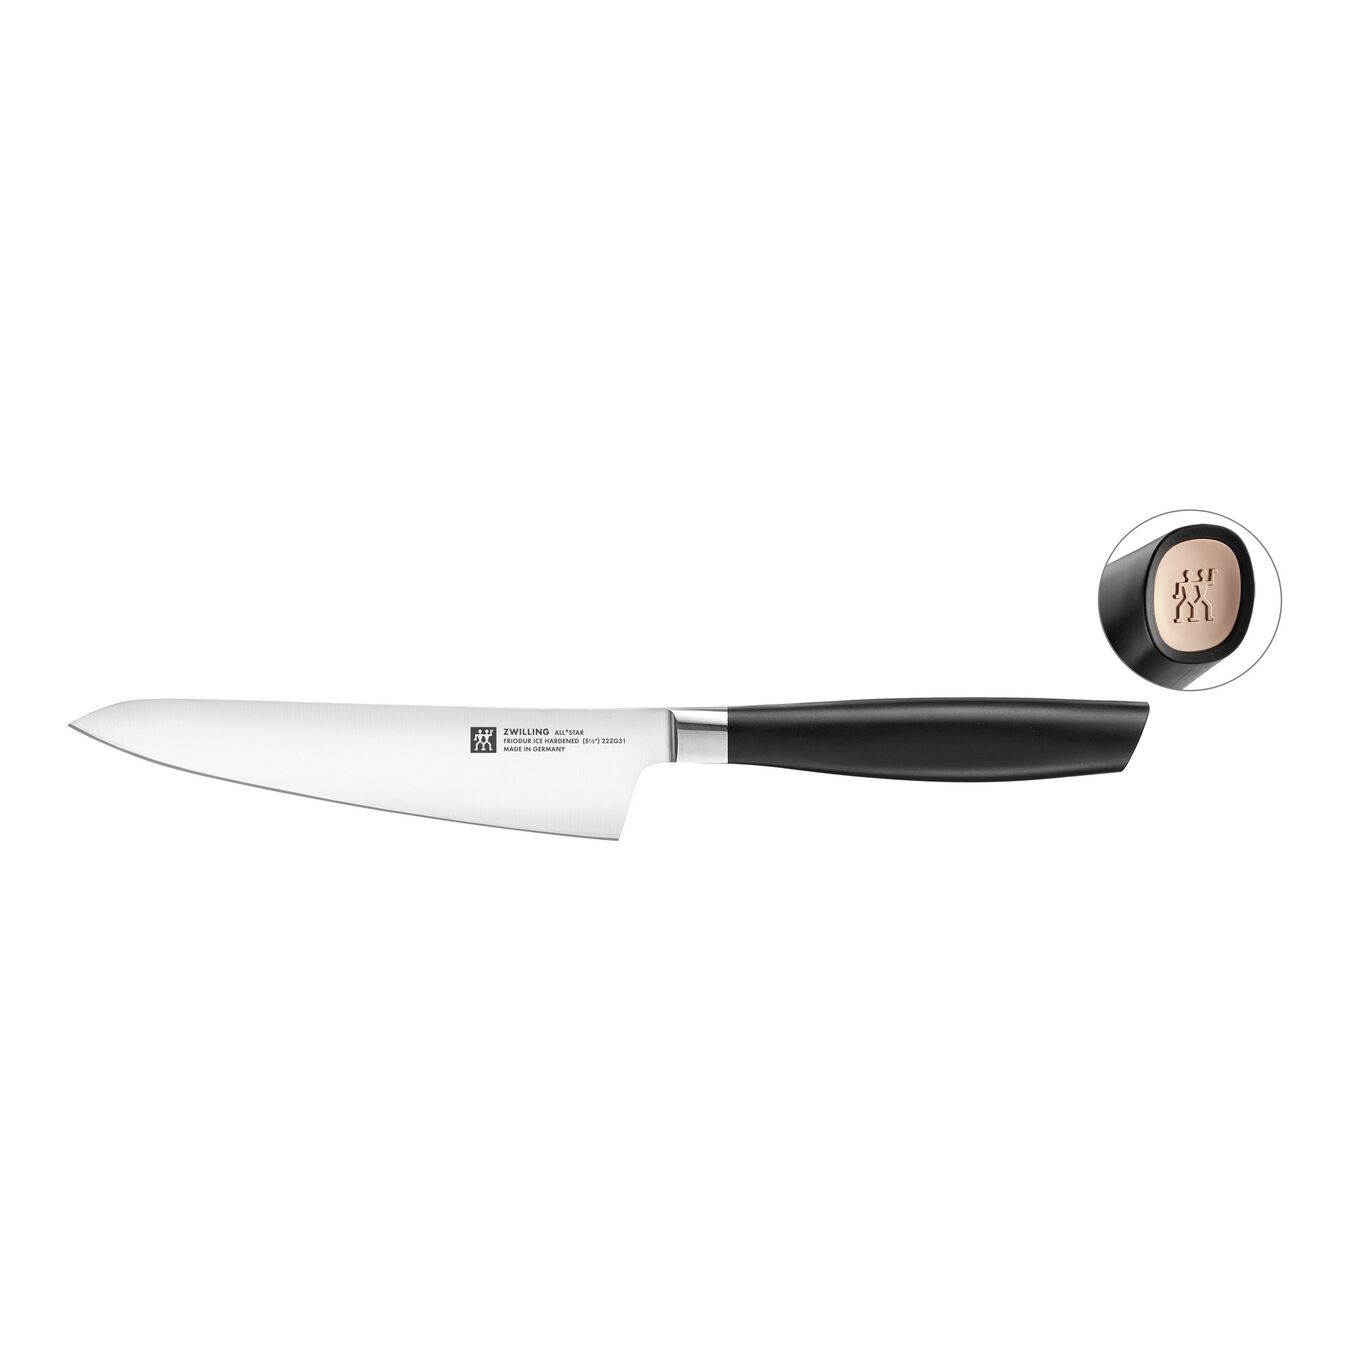 5.5 inch Chef's knife compact, rosegold,,large 1